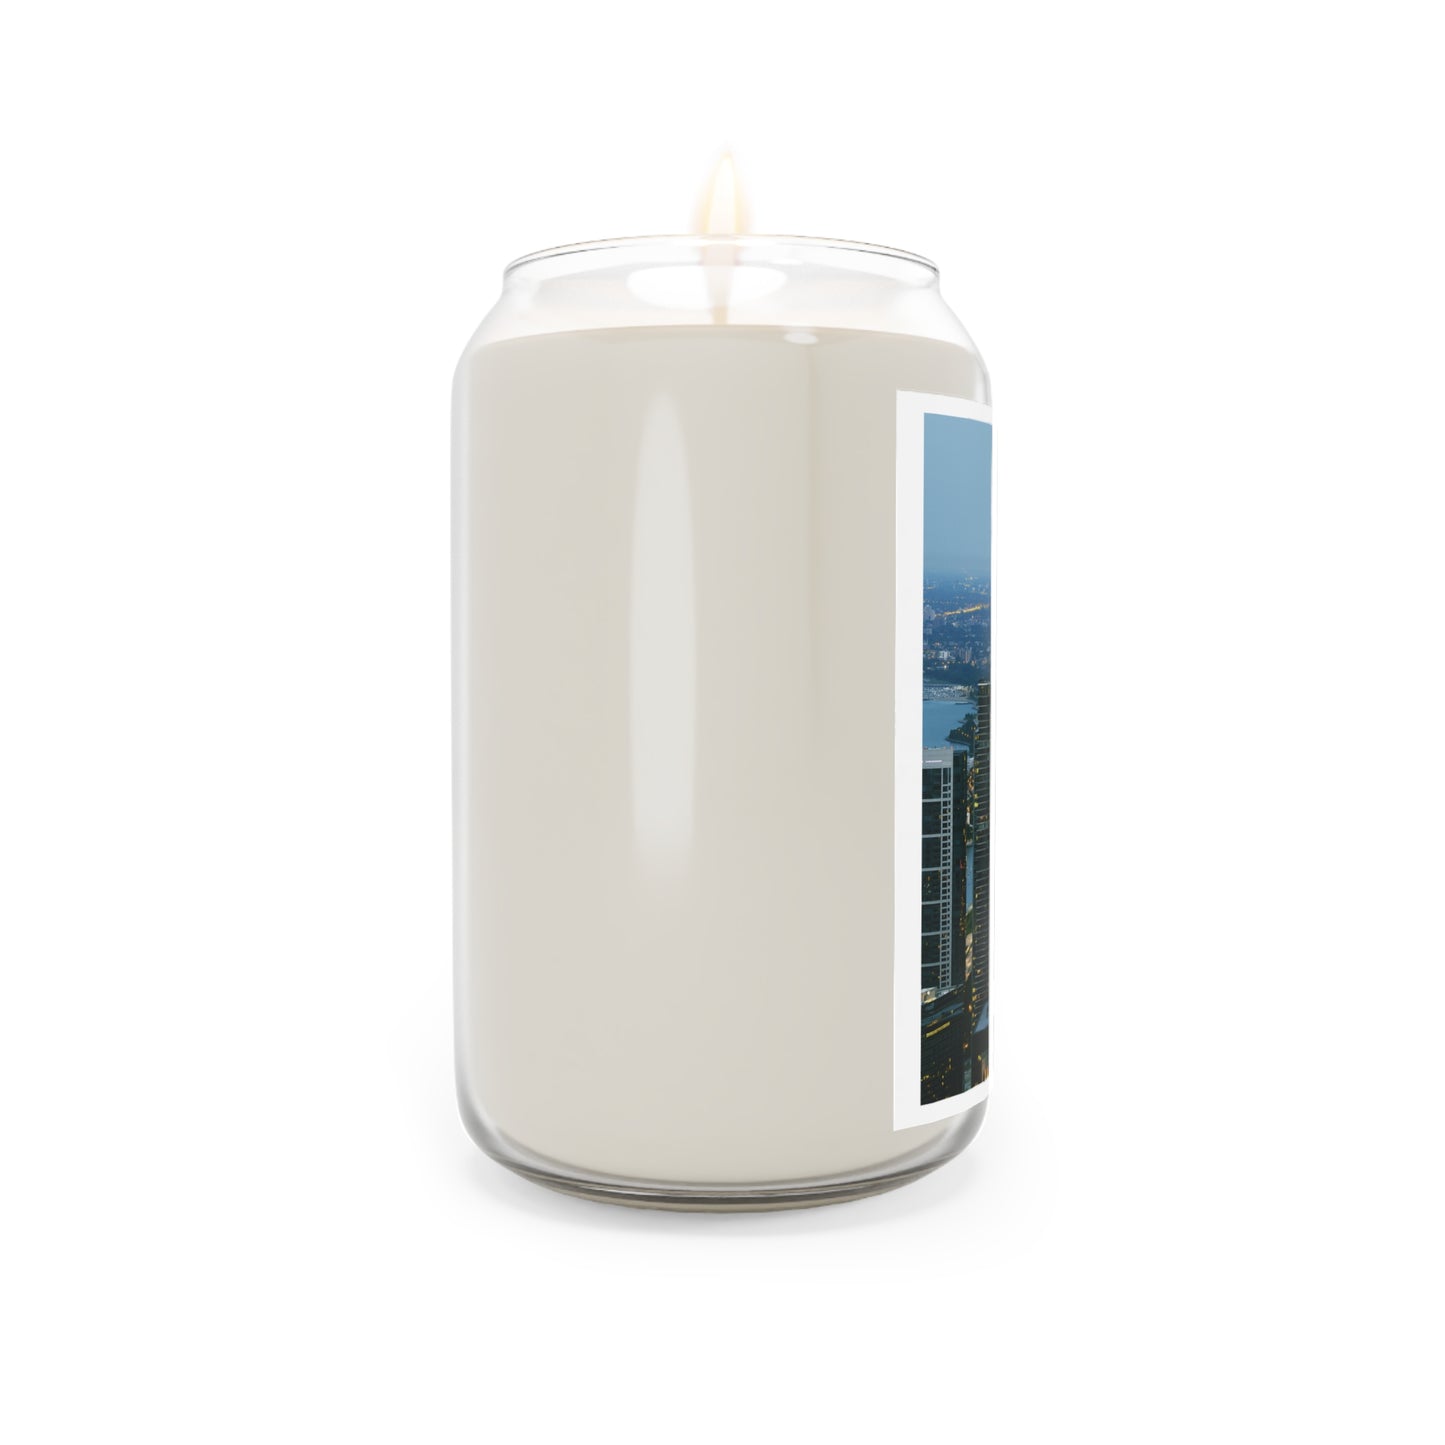 Chicago, Illinois (#021) - Home Town Candles, 13.75oz